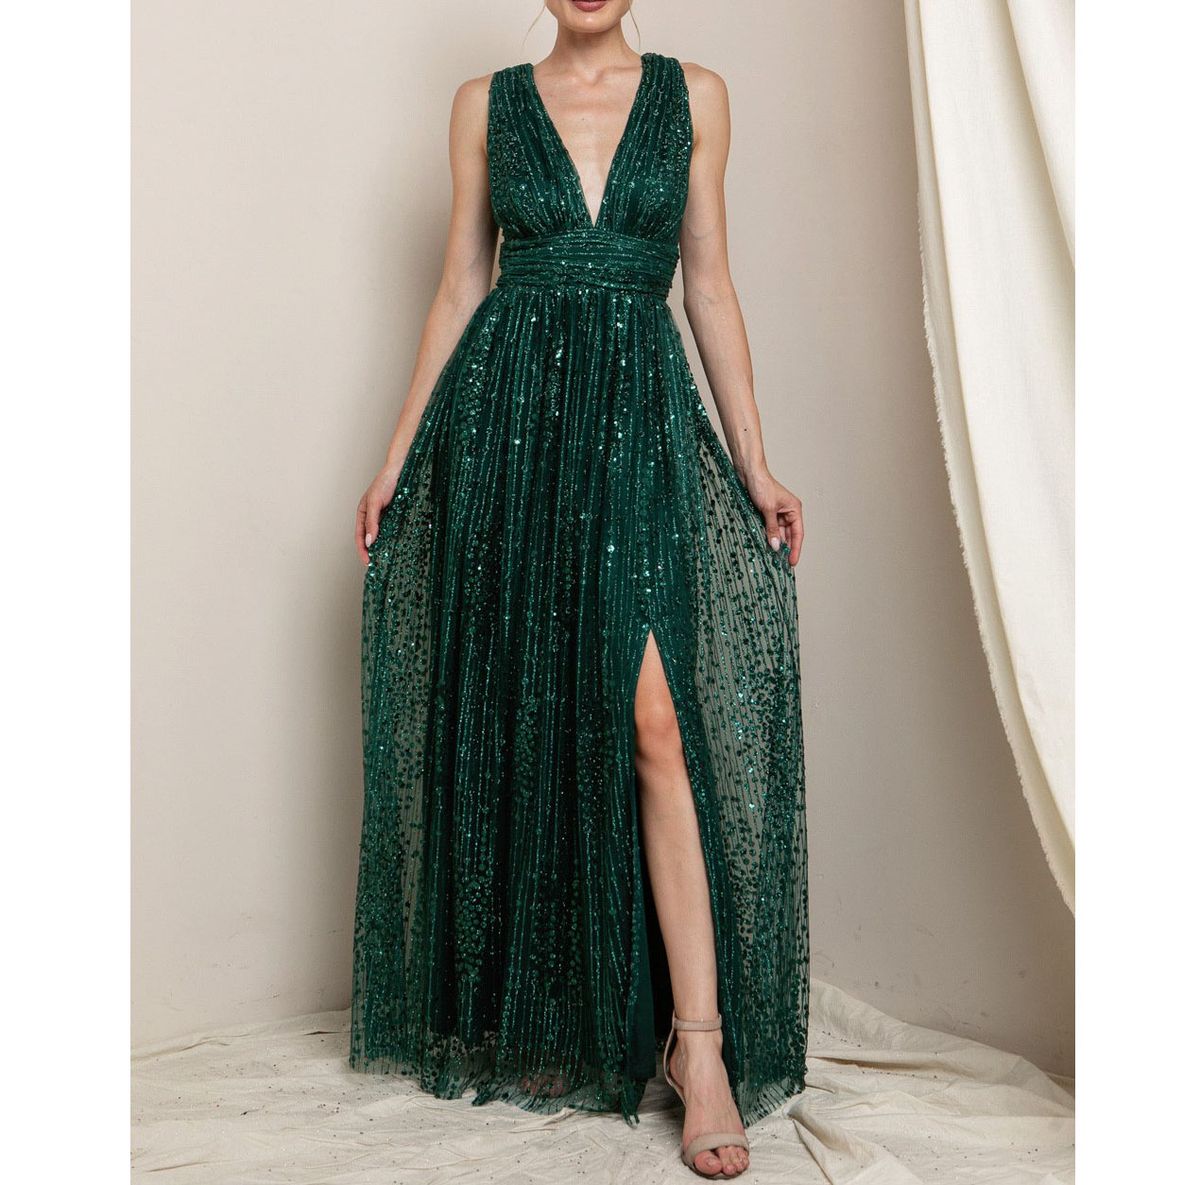 Style Emerald Green Sequined & Glitter Sleeveless V-neck Empire Waist Formal Gown Soeblue  Size 12 Sequined Green Side Slit Dress on Queenly